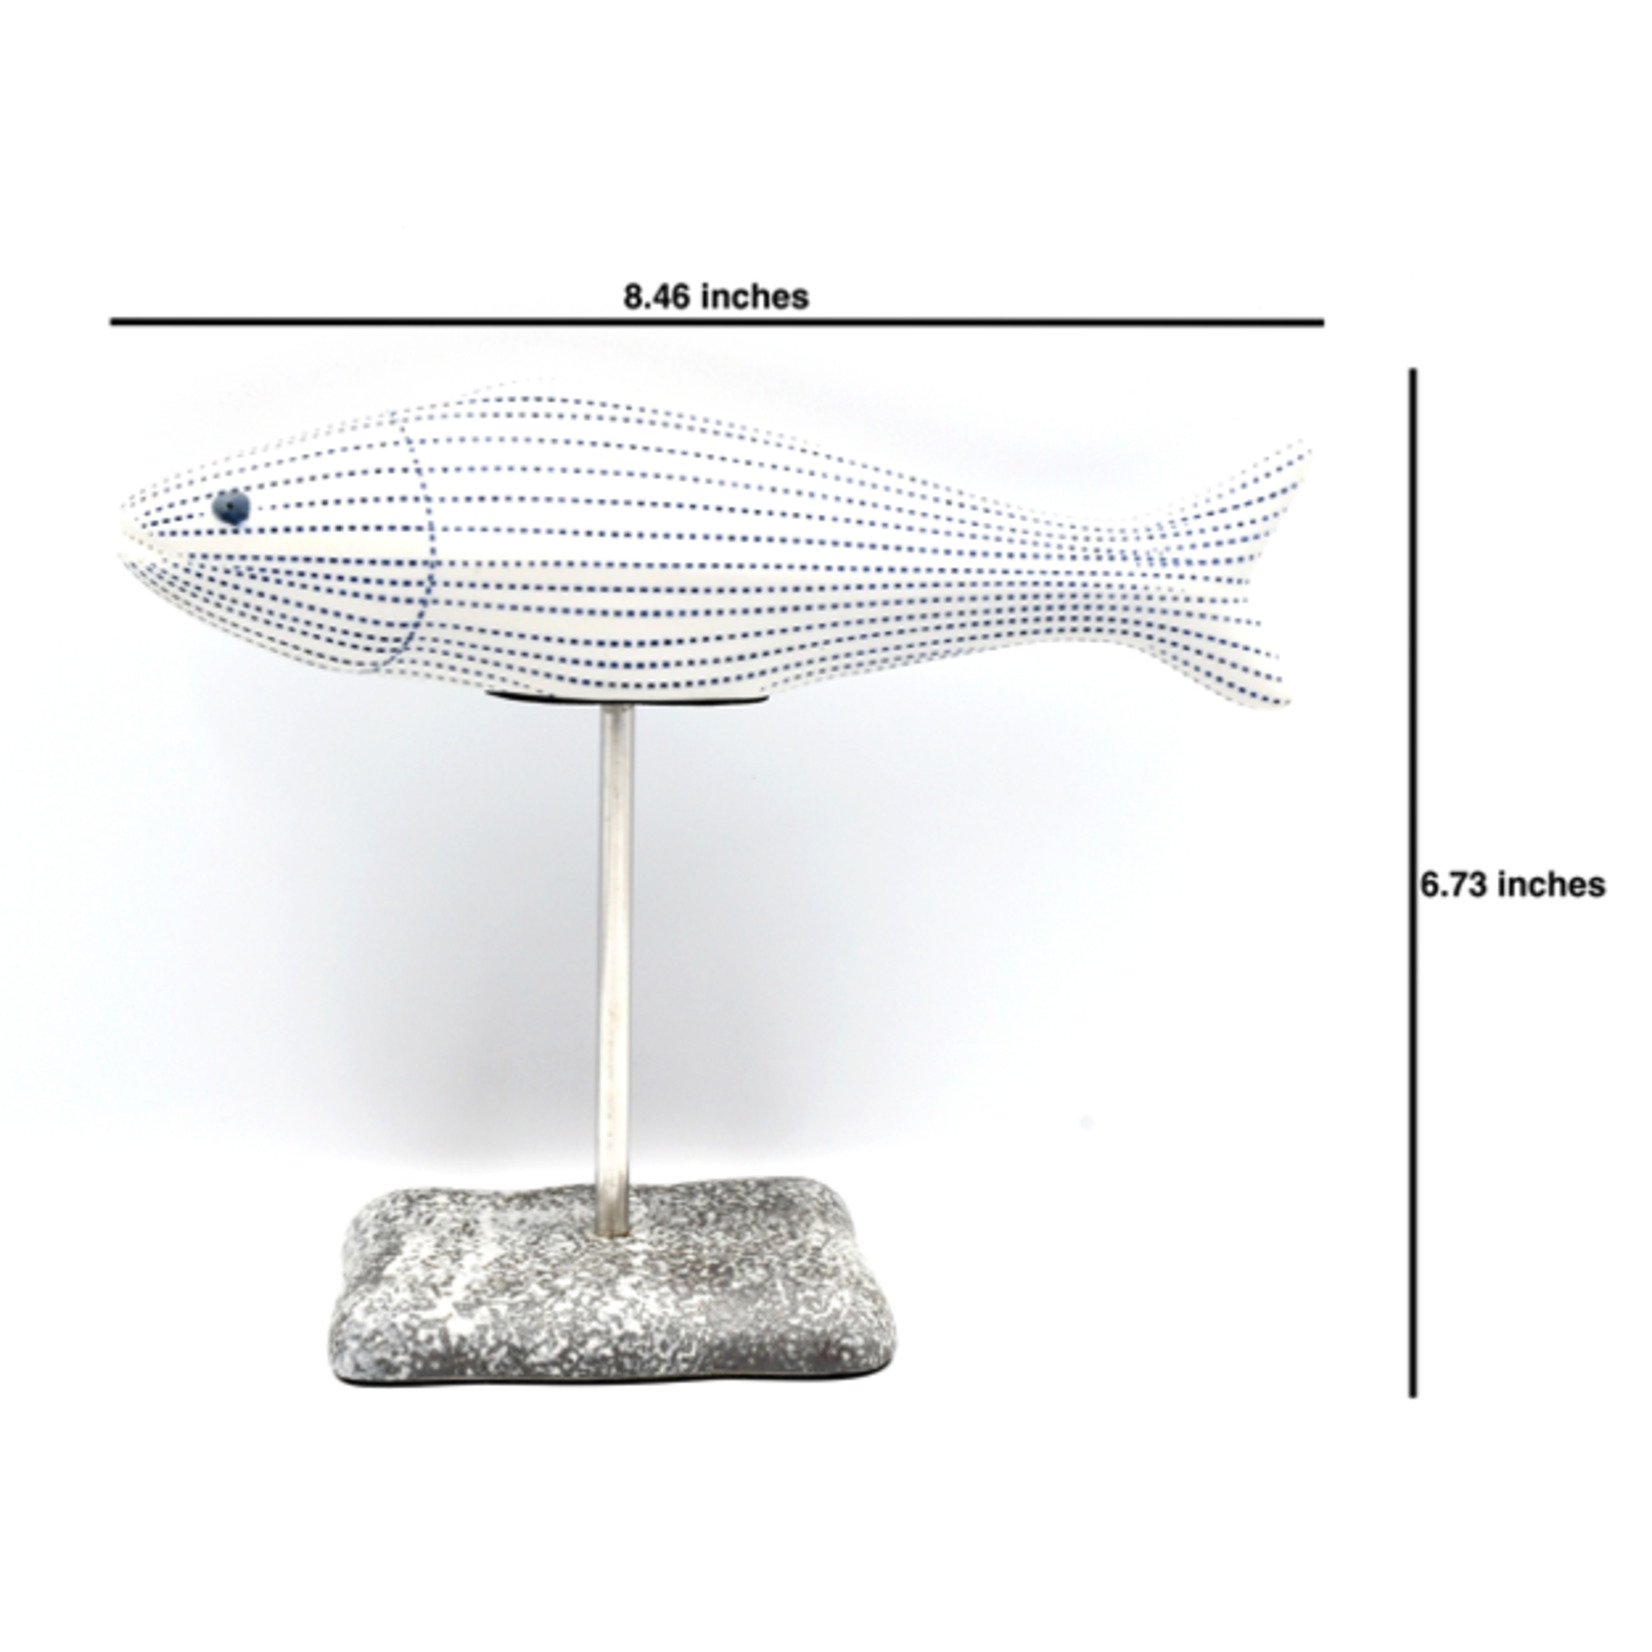 Outside The Box 7" Adrians Fish White & Blue Dots Handcrafted Porcelain Ceramic Sculpture